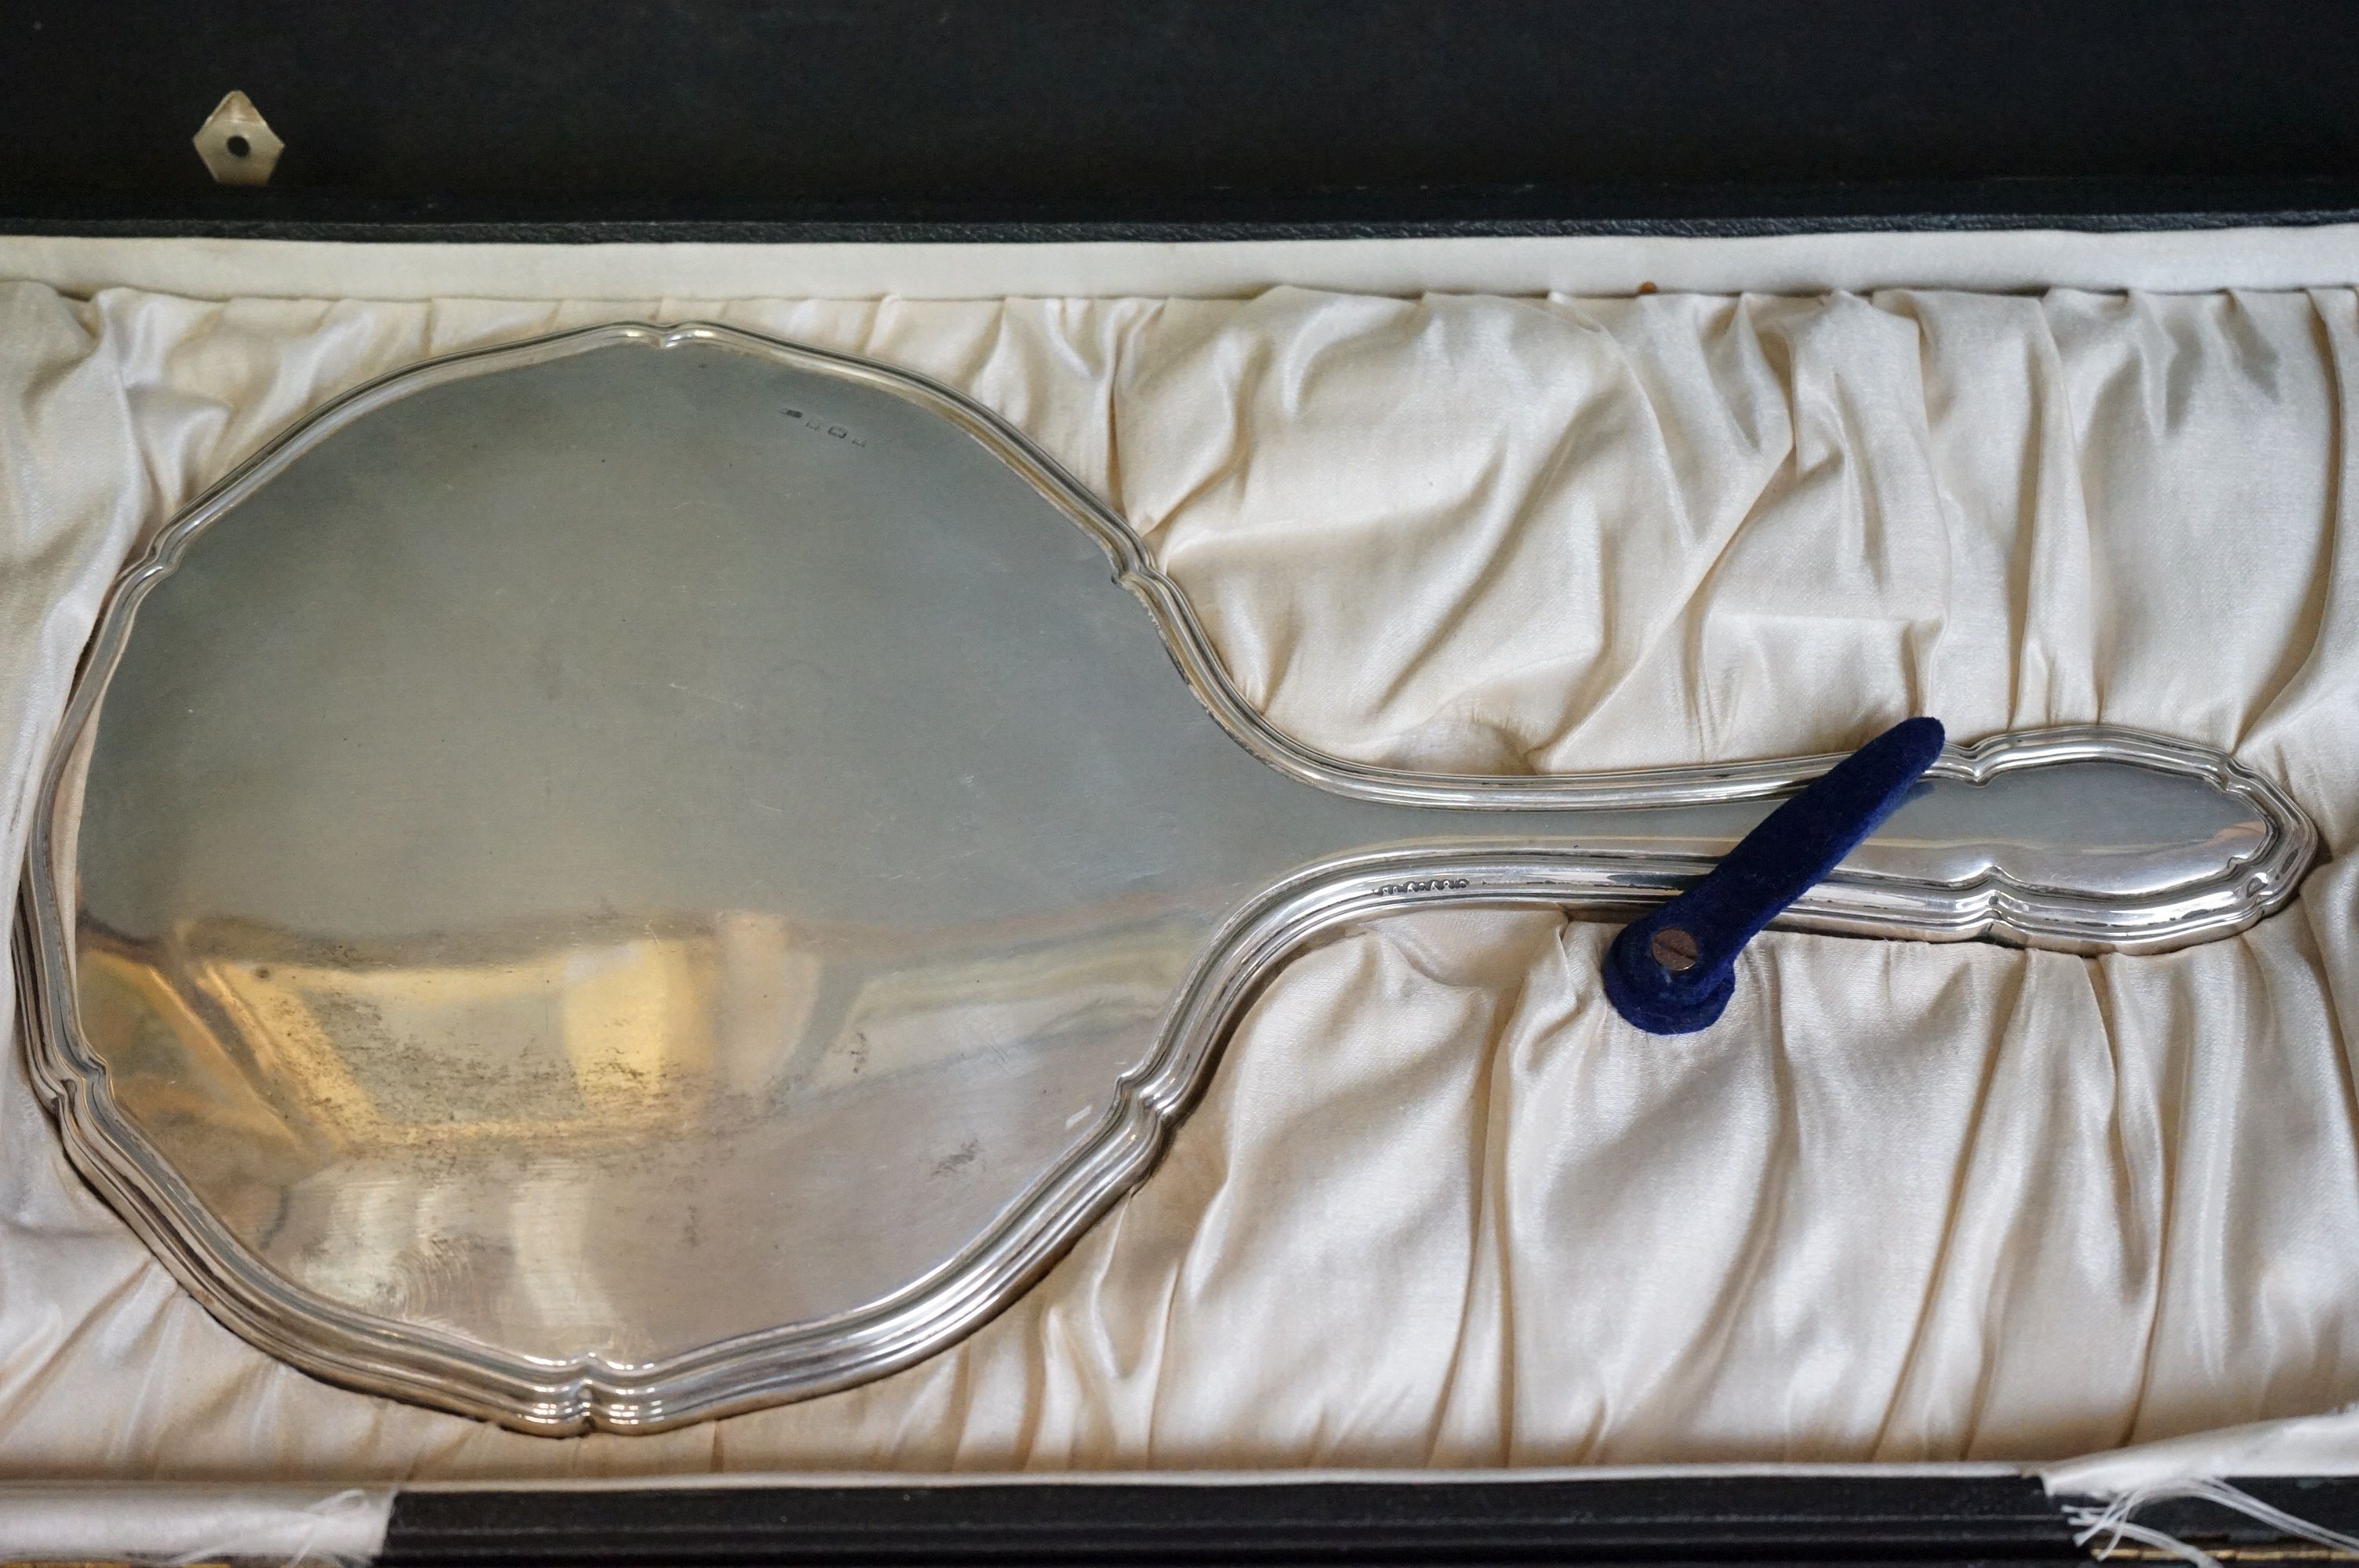 A Gorham Manufacturing Co sterling silver vanity brush & mirror set in original fitted box - Image 7 of 9